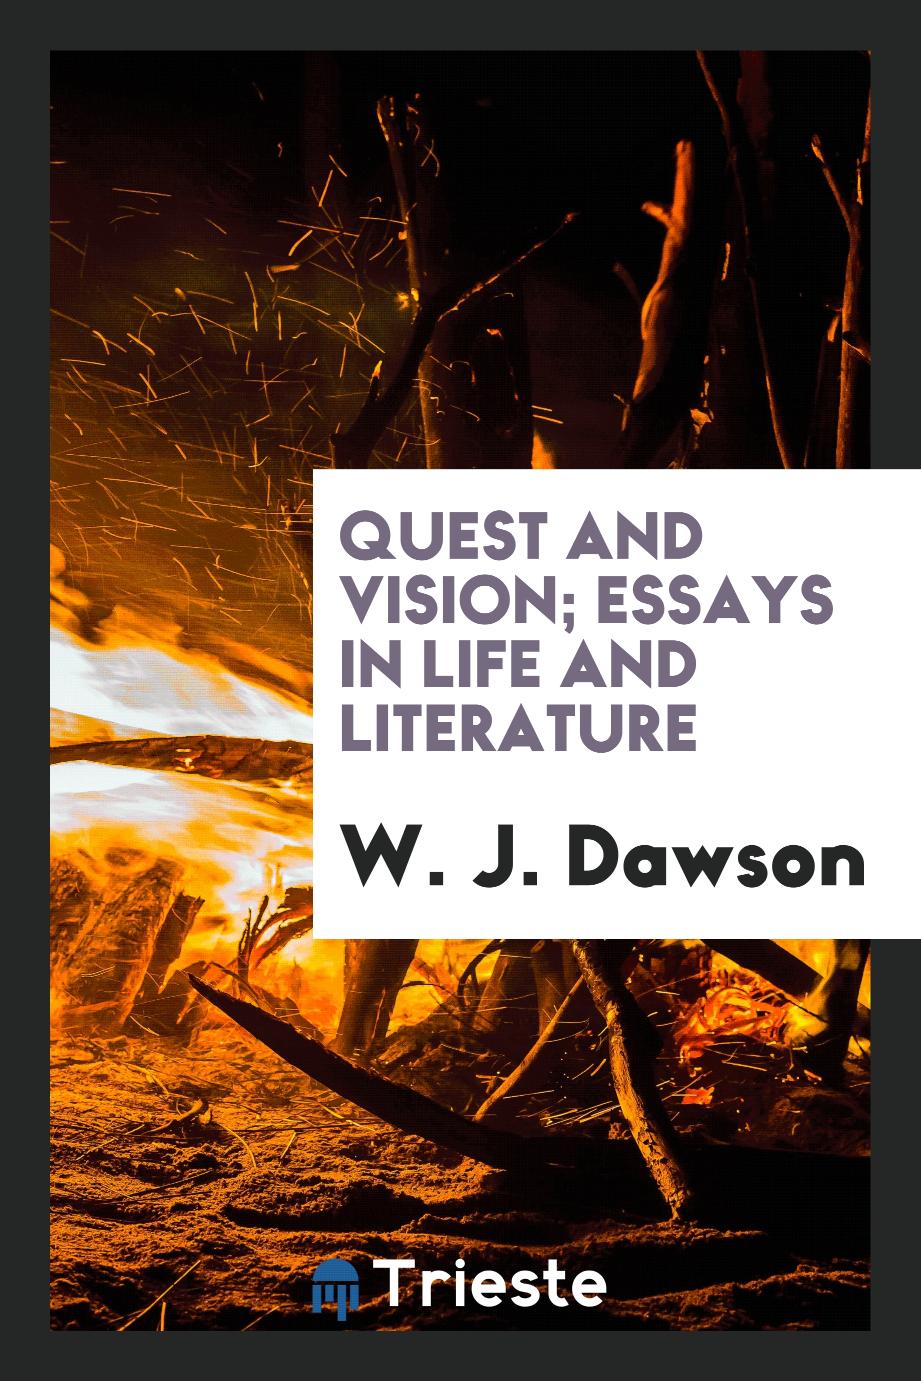 Quest and vision; essays in life and literature